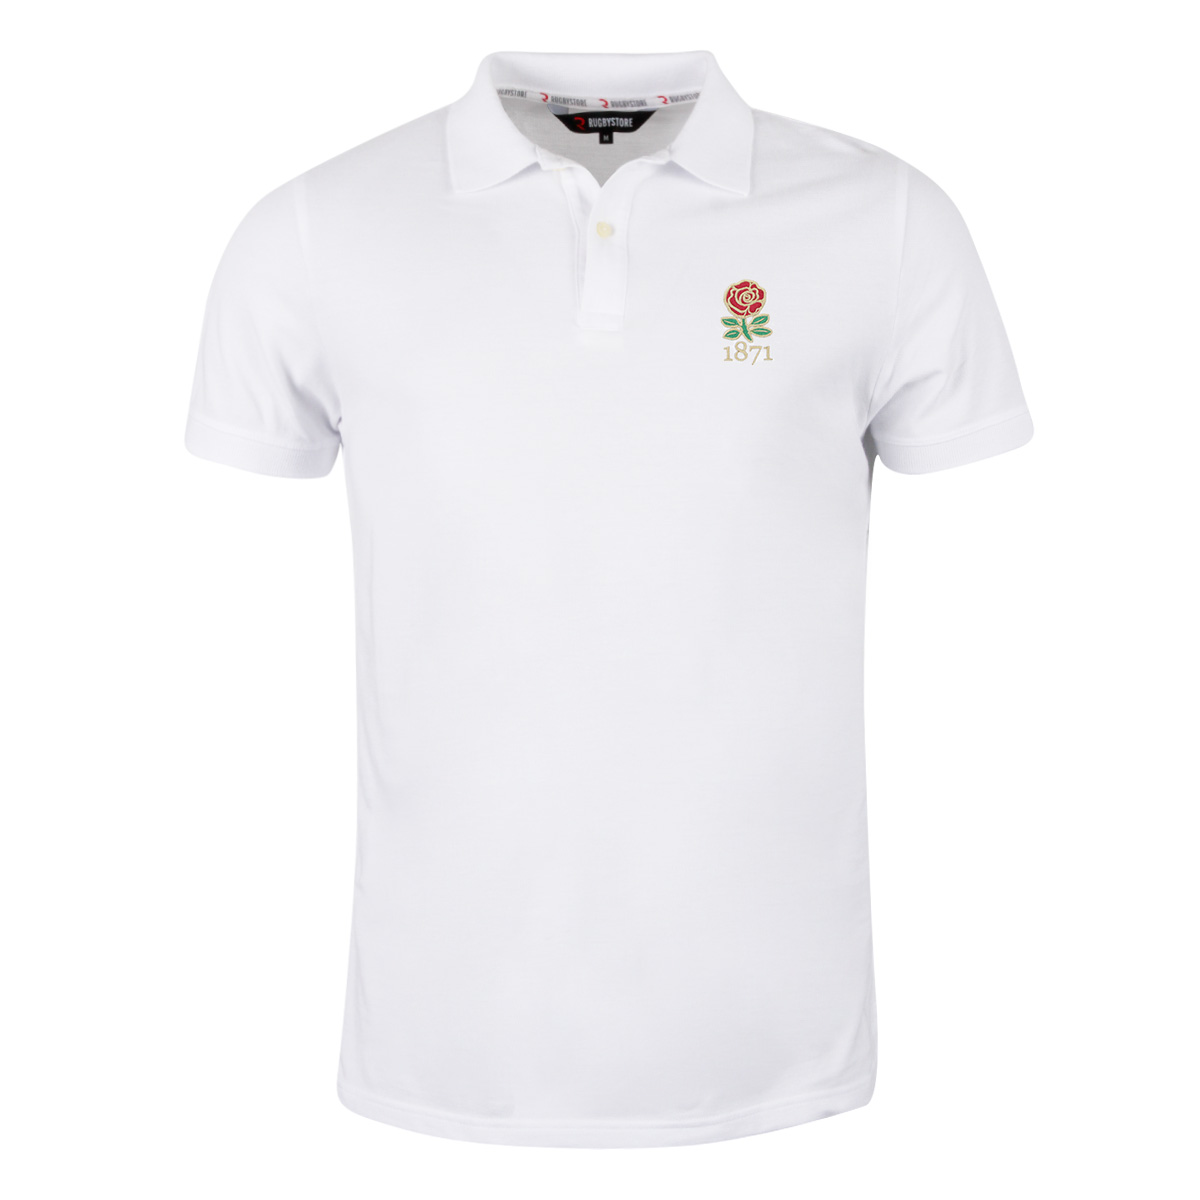 Rugbystore England 1871 Mens Polo Shirt - White | rugbystore